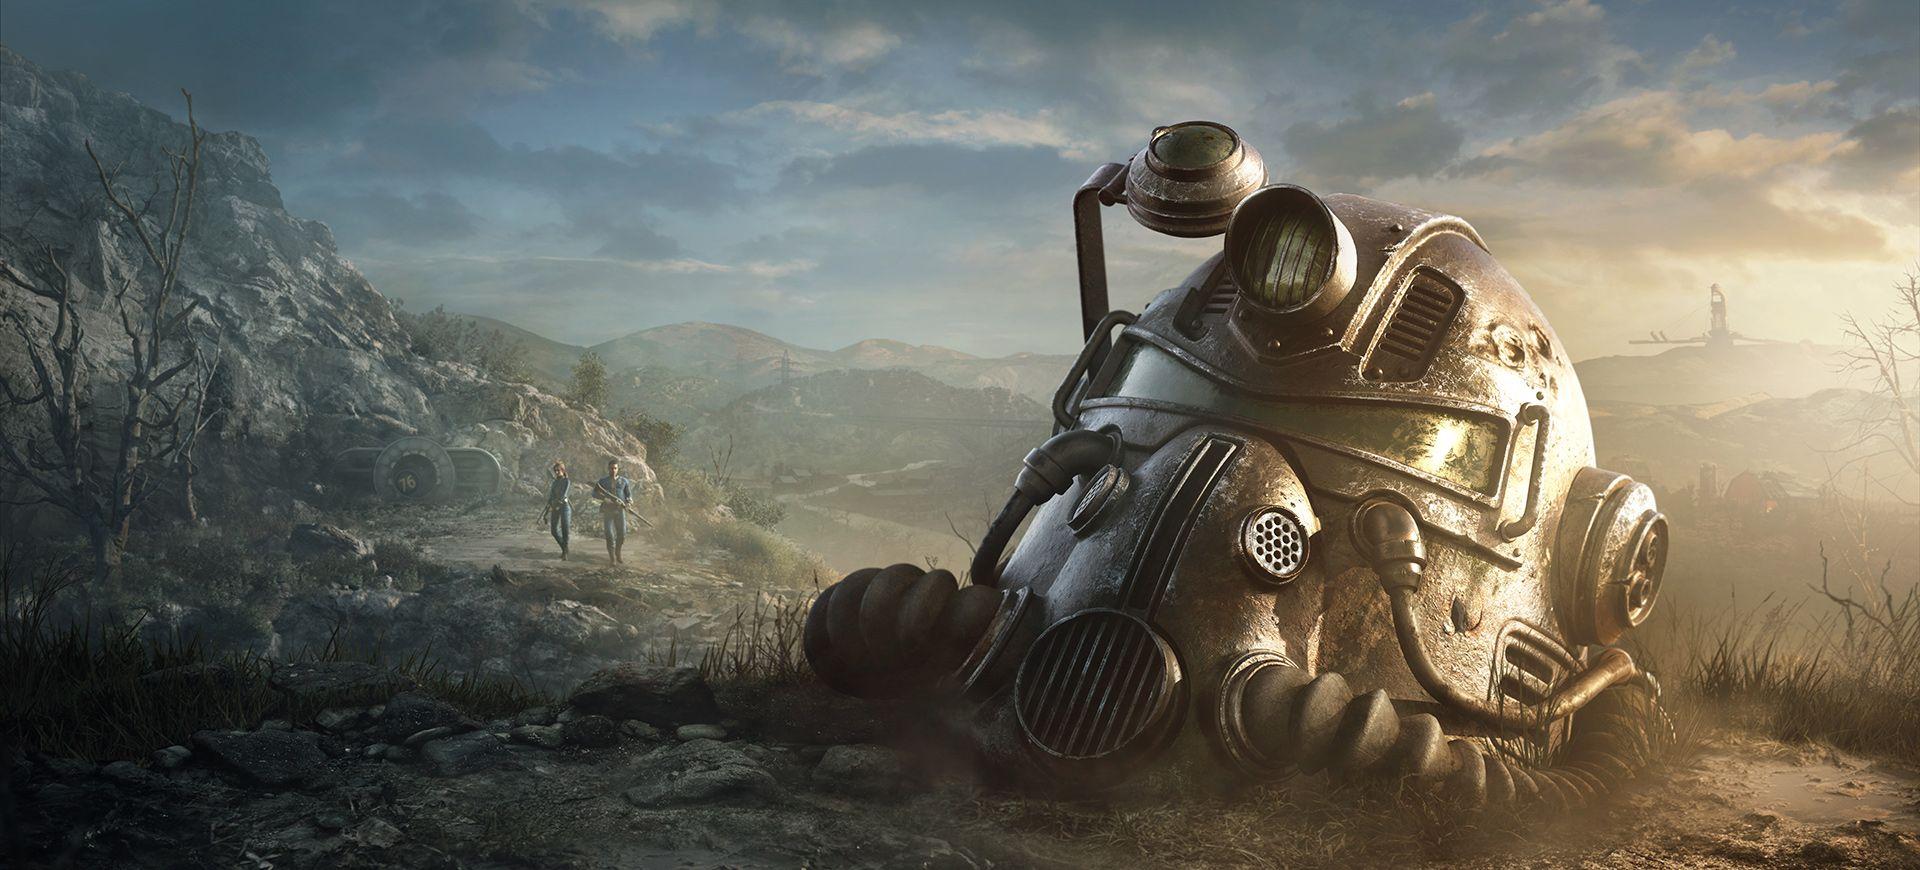 Is Fallout 76 Crossplay or Cross Platform?